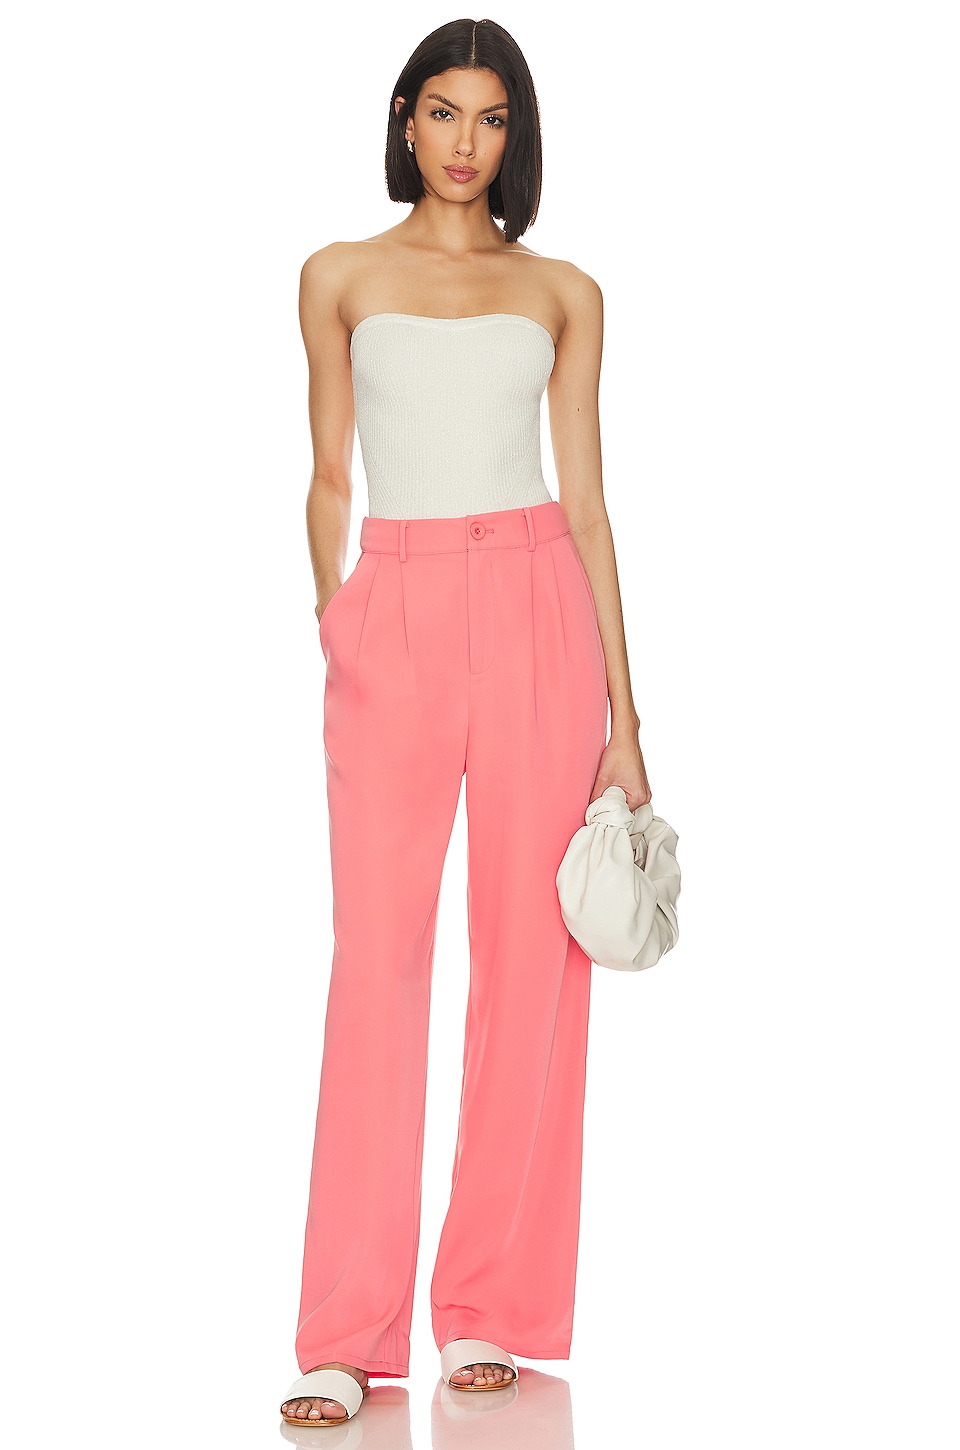 Lovers and Friends x Jetset Christina Sydney Pant in Coral Pink